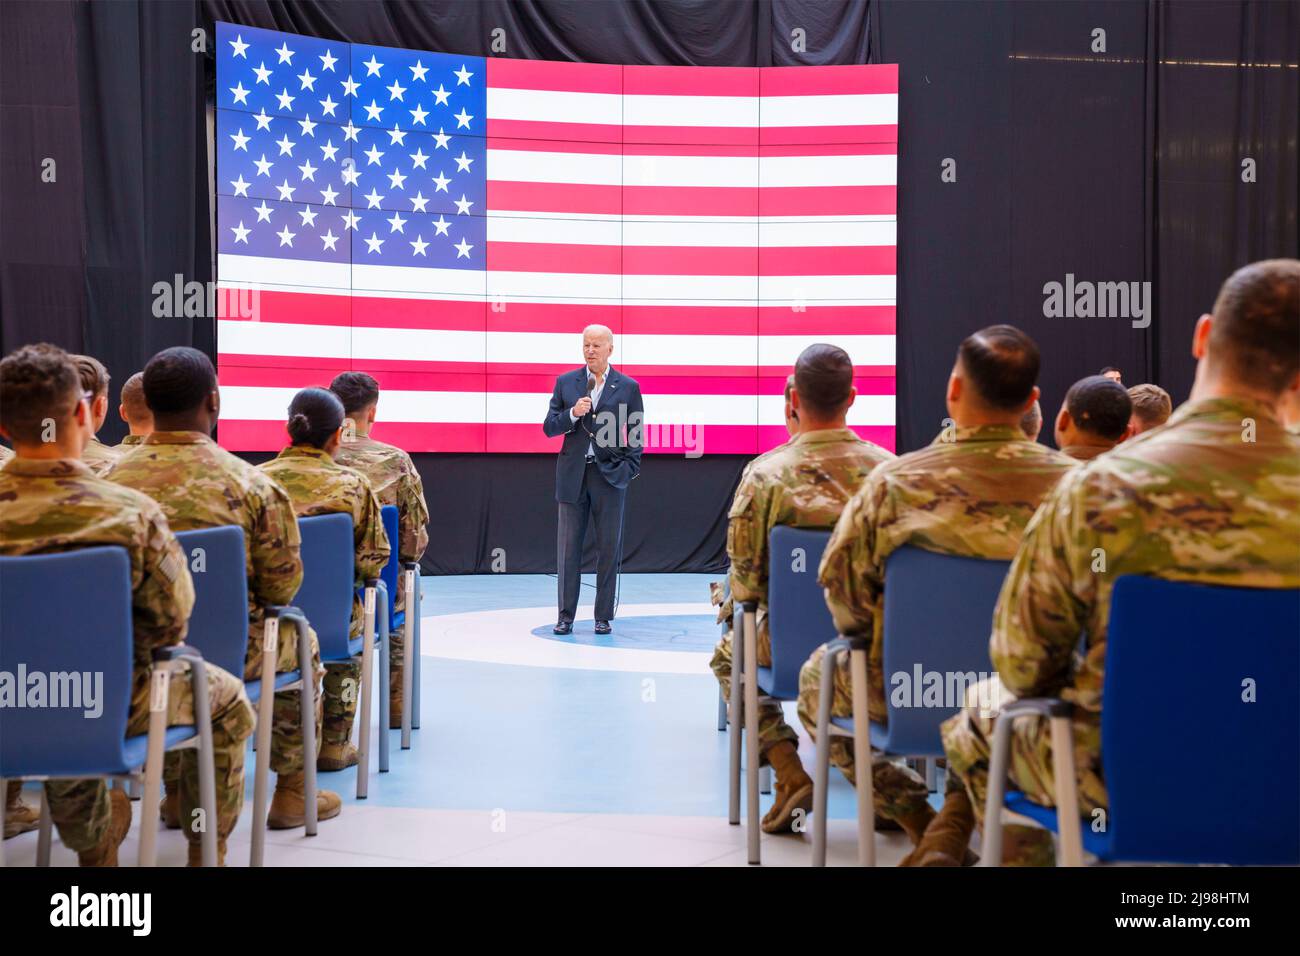 Rzeszow, Poland. 25 March, 2022. U.S President Joe Biden, delivers remarks to members of the U.S. Army 82nd Airborne Division during a visit March 25, 2022 in Rzeszow, Poland.  Credit: Adam Schultz/White House Photo/Alamy Live News Stock Photo